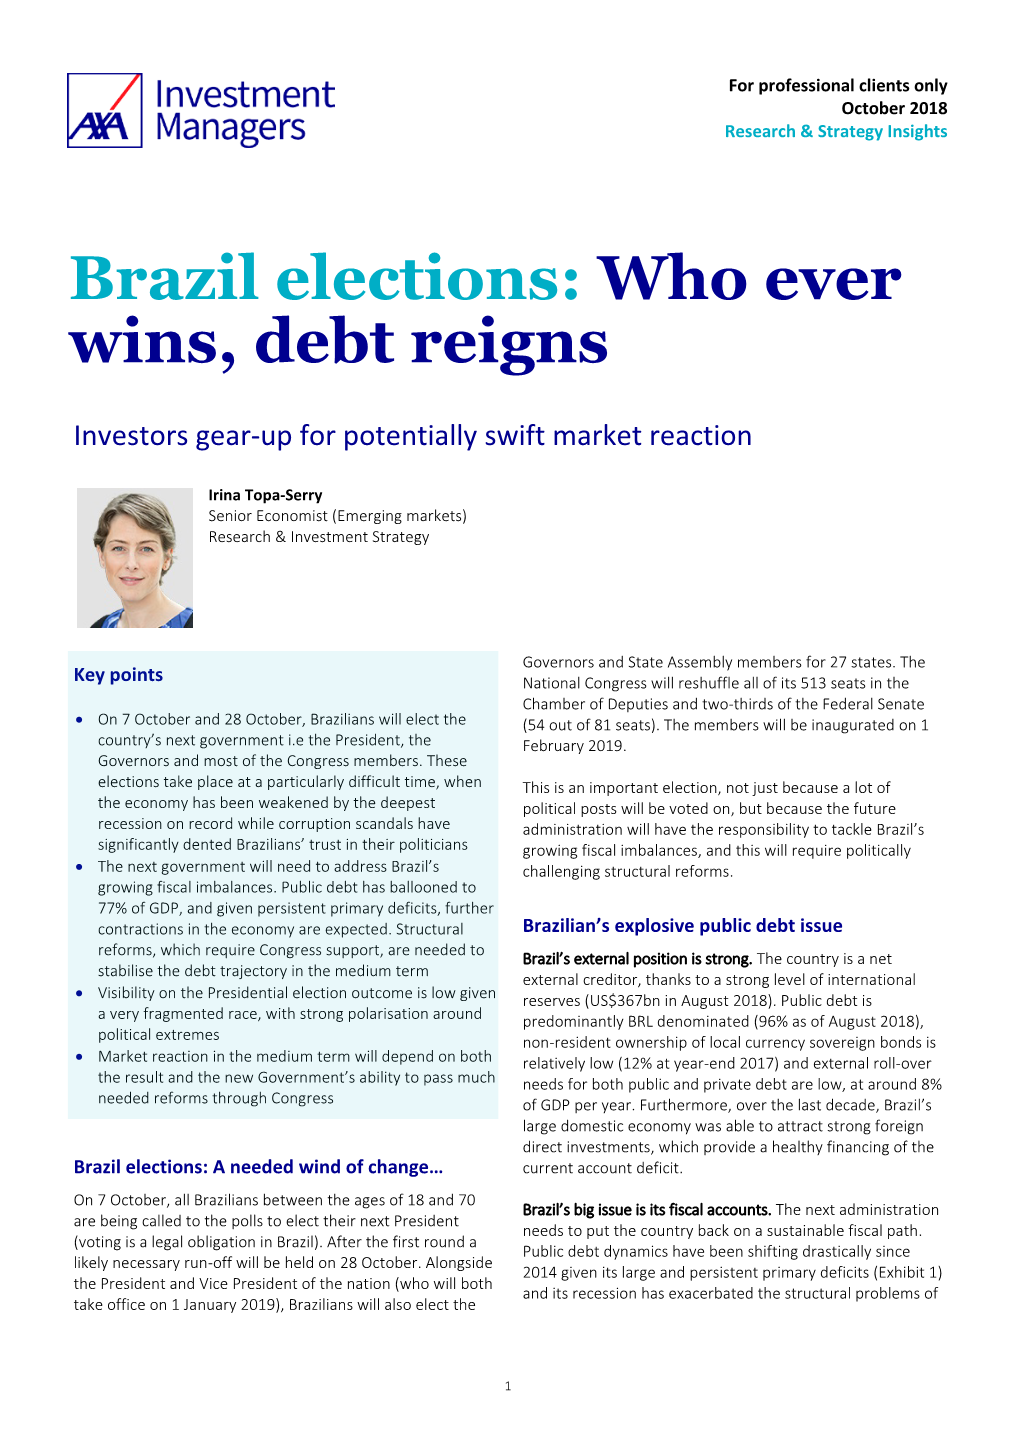 Brazil Elections: Who Ever Wins, Debt Reigns